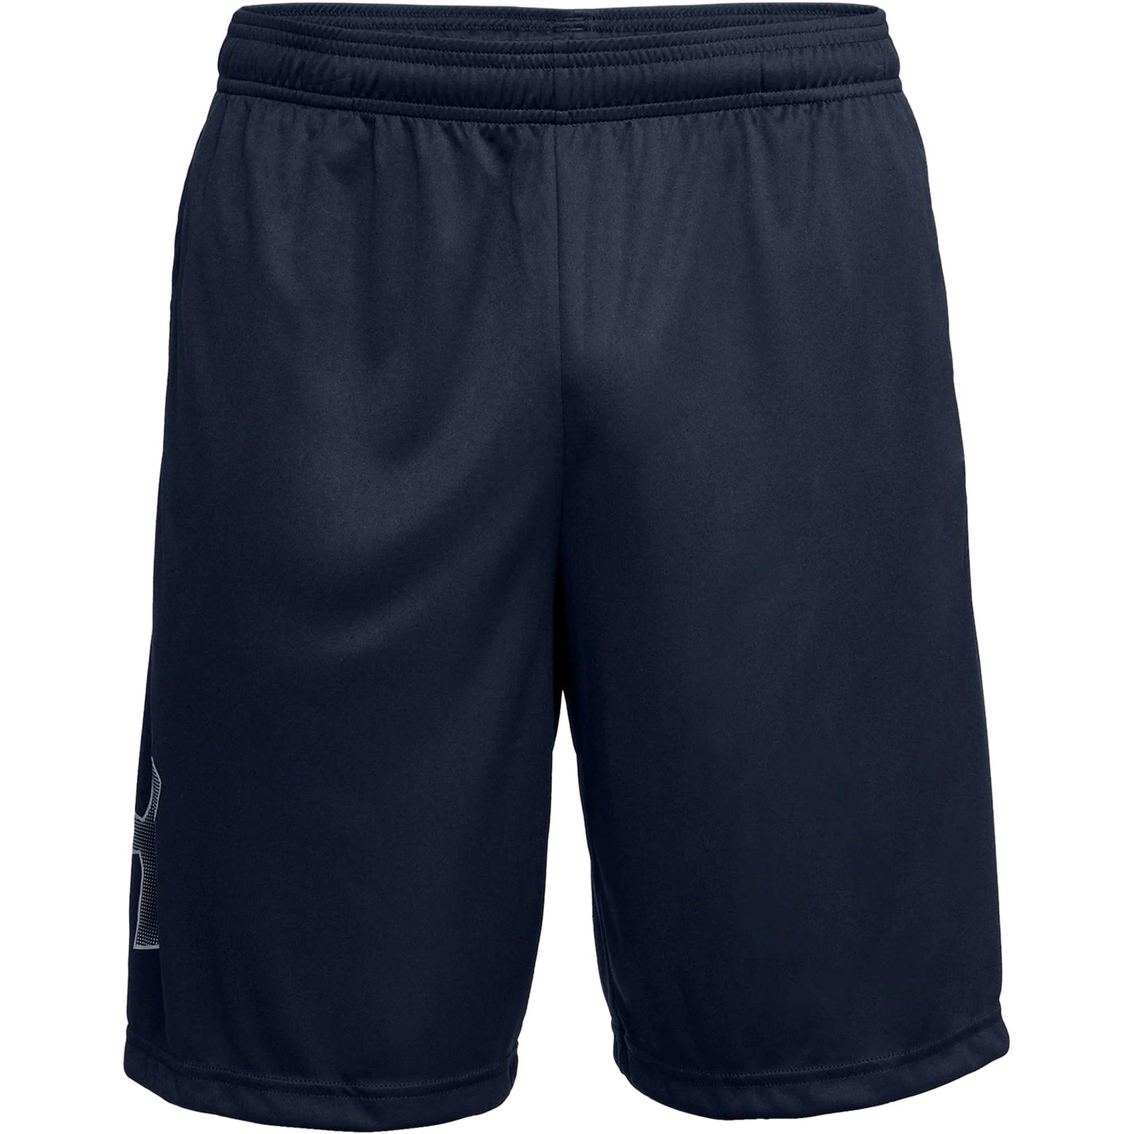 Under Armour Tech Graphic Shorts - Image 4 of 5